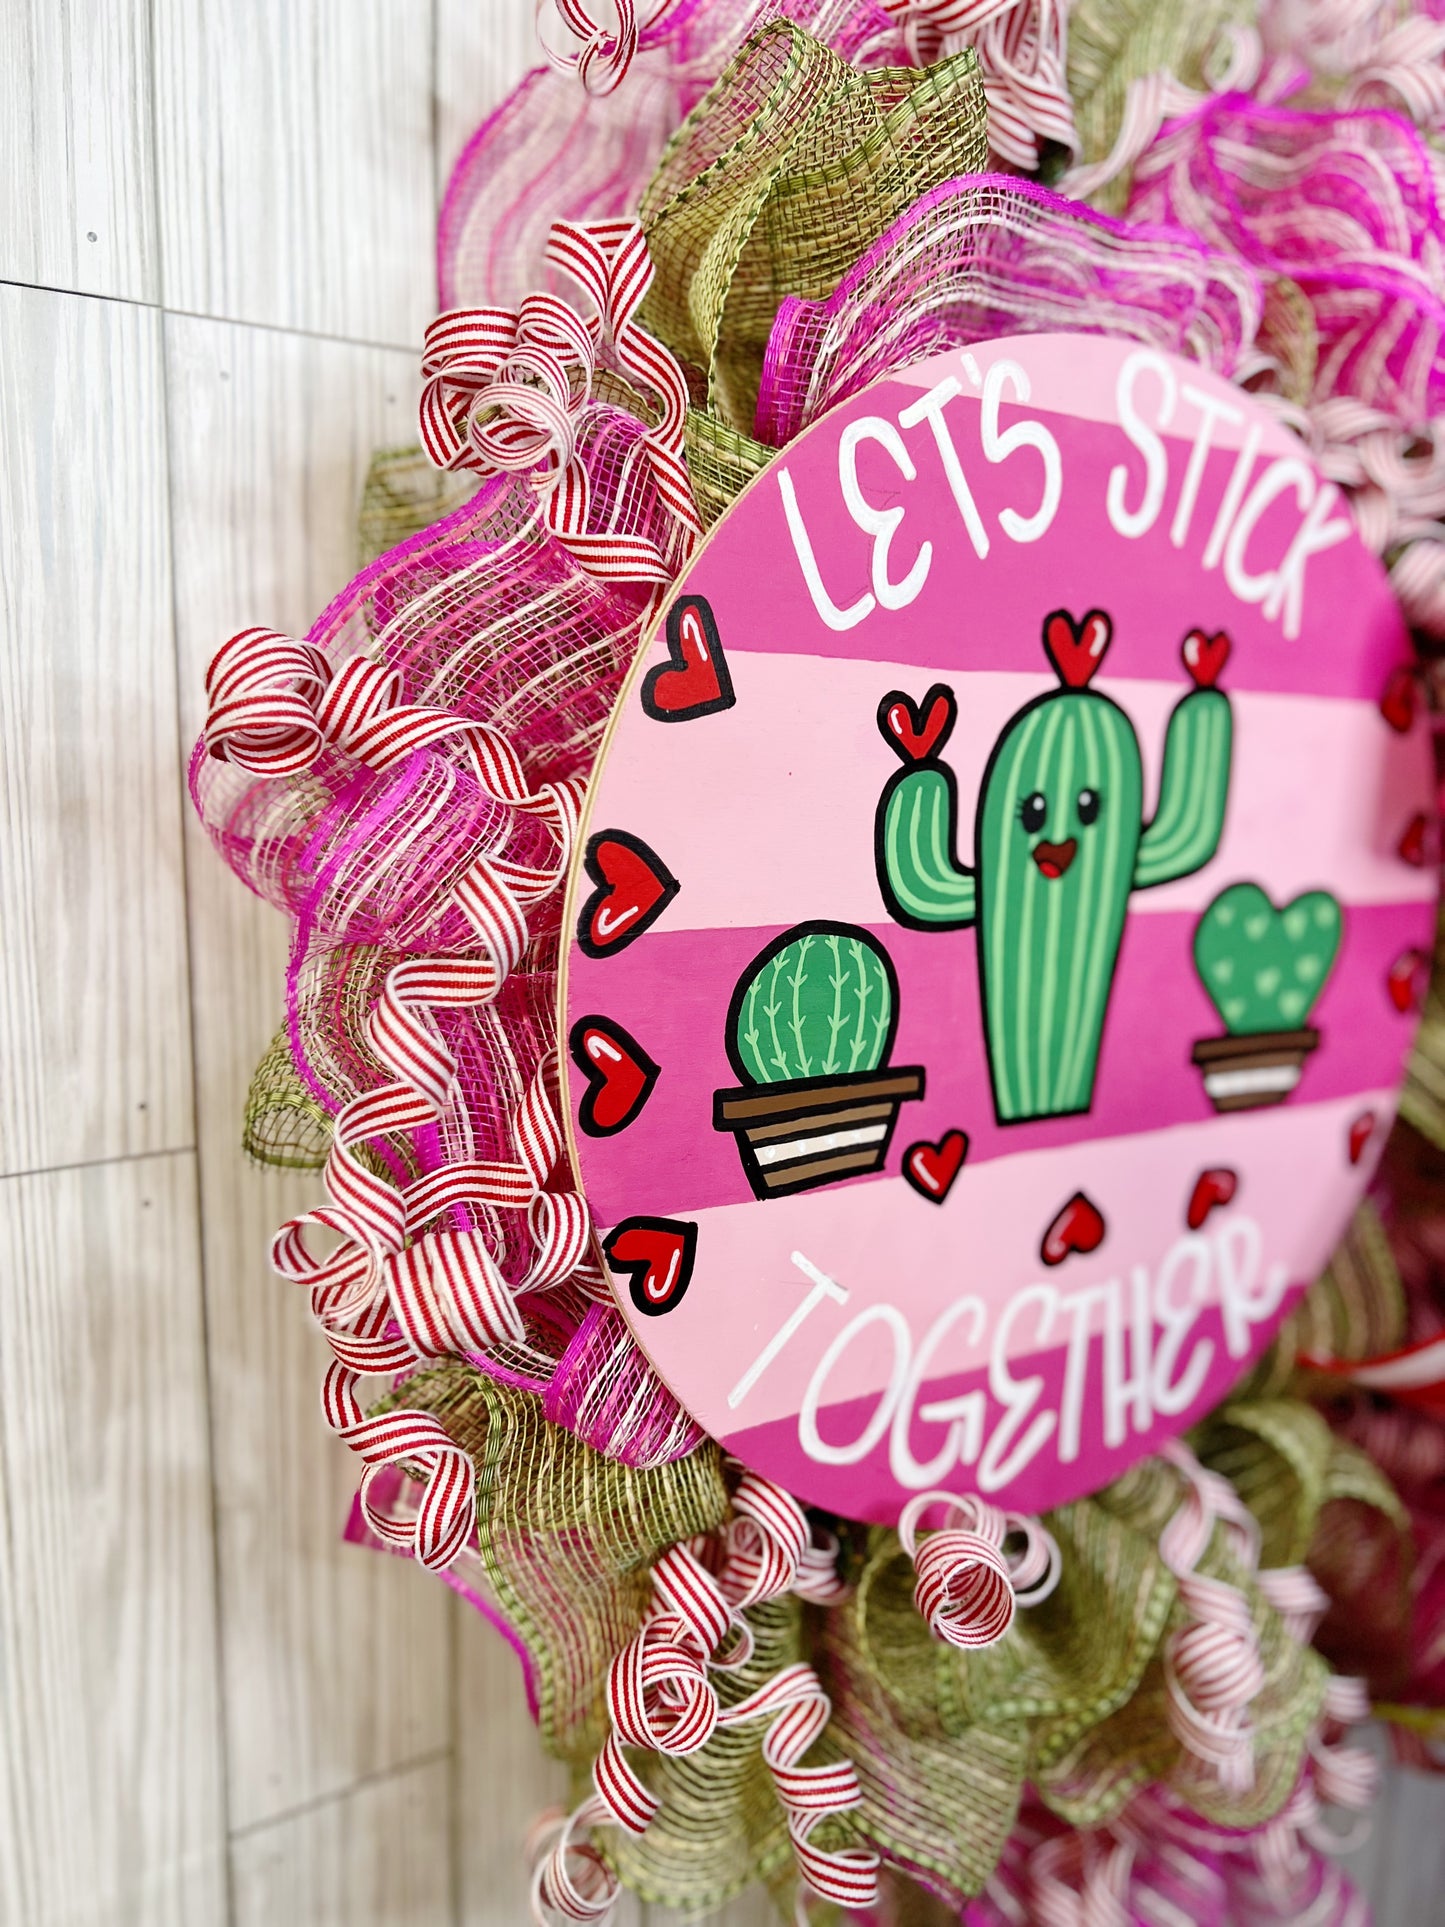 Let’s Stick Together Cactus Wreath